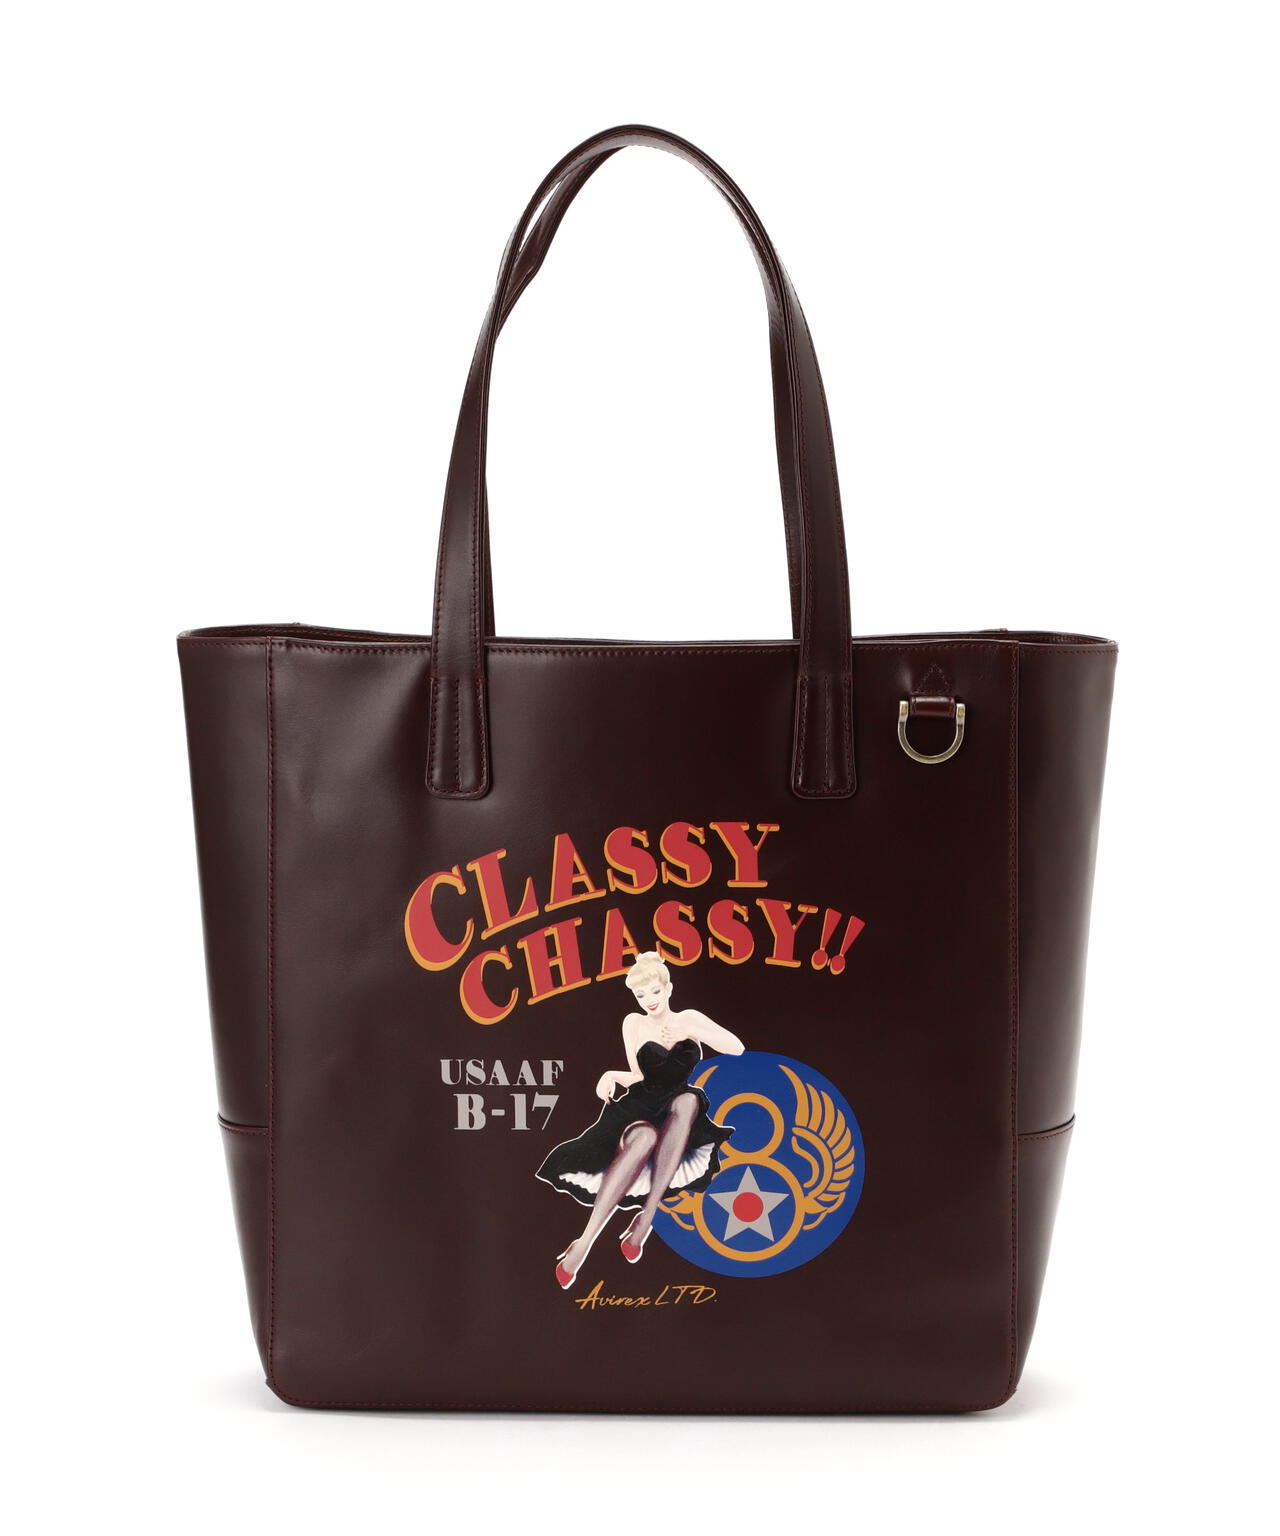 LEATHER TOTE BAG NOSE ART / レザートートバッグ ノーズアート ...